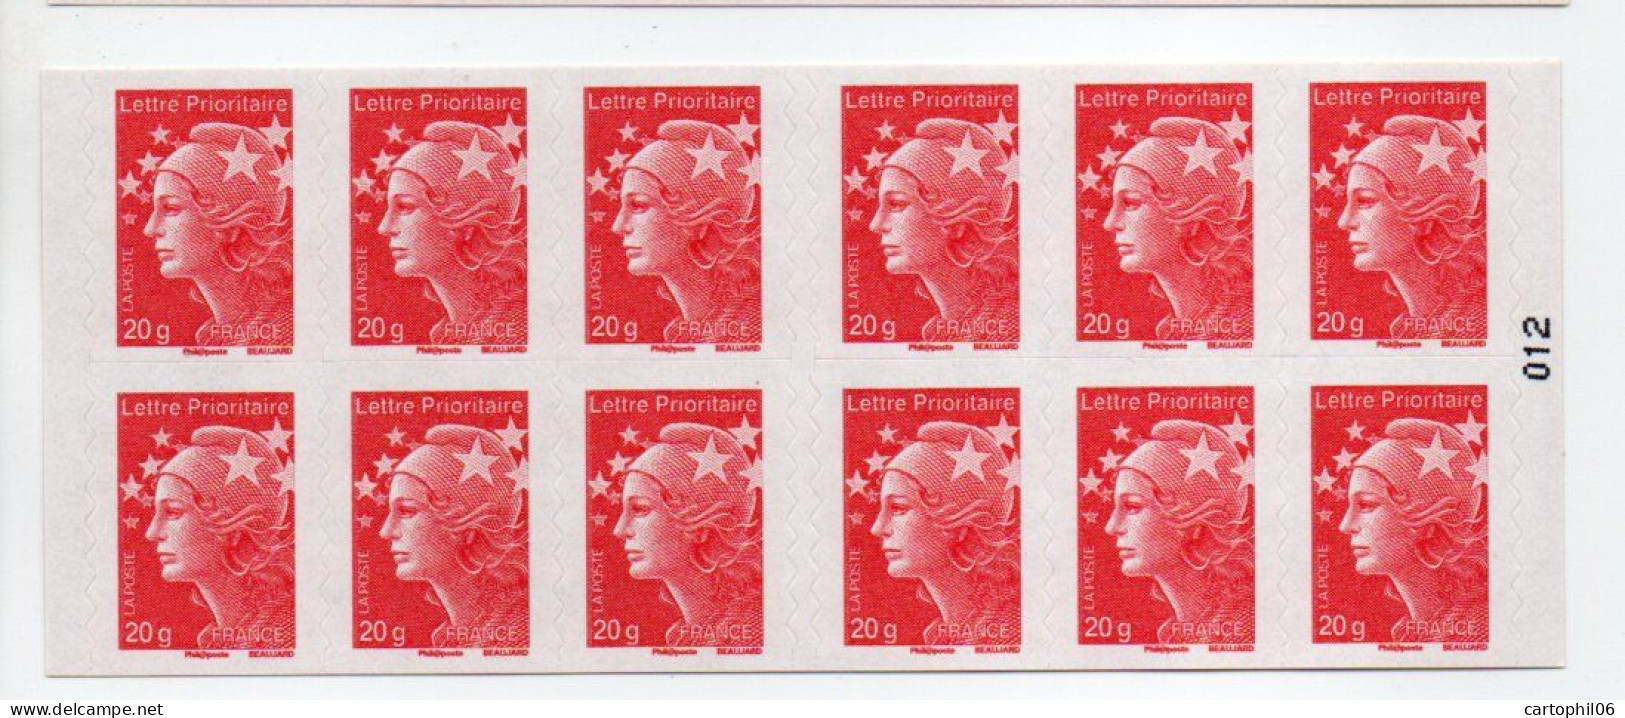 - FRANCE Carnet 12 Timbres Prioritaires Marianne De Beaujard - MON TIMBRAMOI - VALEUR FACIALE 17,16 € - - Modern : 1959-...